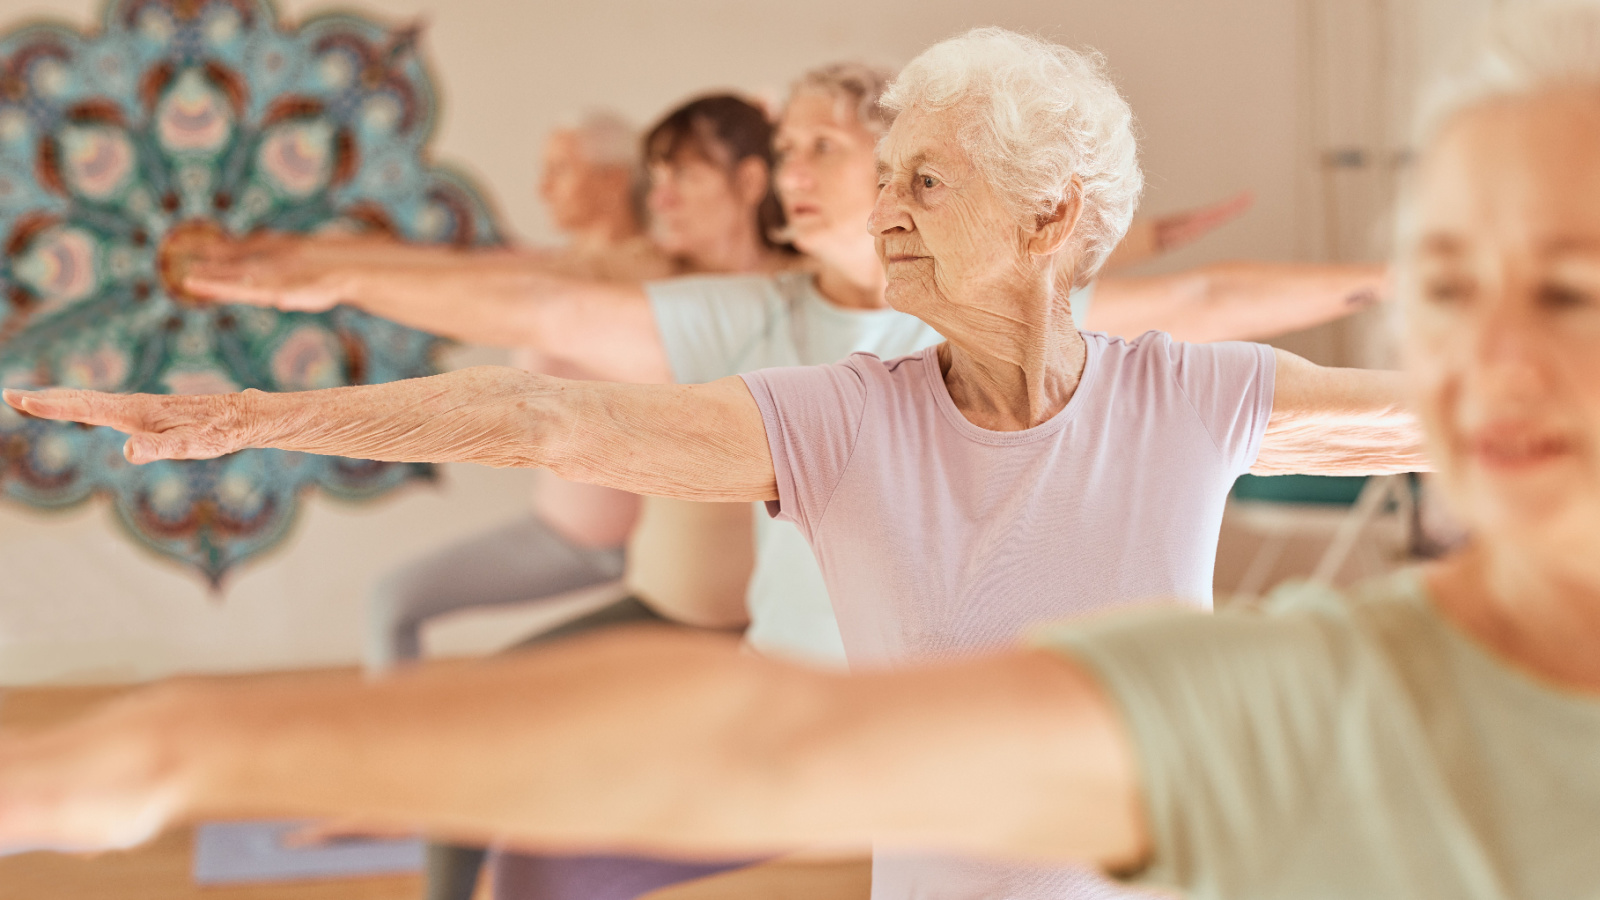 image credit: PeopleImages.com-Yuri-A/Shutterstock <p><span>Wake up with the sun and ease into the day with gentle, flowing stretches. This program emphasizes flexibility and mindfulness, perfect for those over 50 who want to maintain agility. You’ll start with deep breathing to center your thoughts, then progress through stretches that target every major muscle group. By the end of each session, you’ll feel more limber and ready to tackle the day ahead.</span></p>